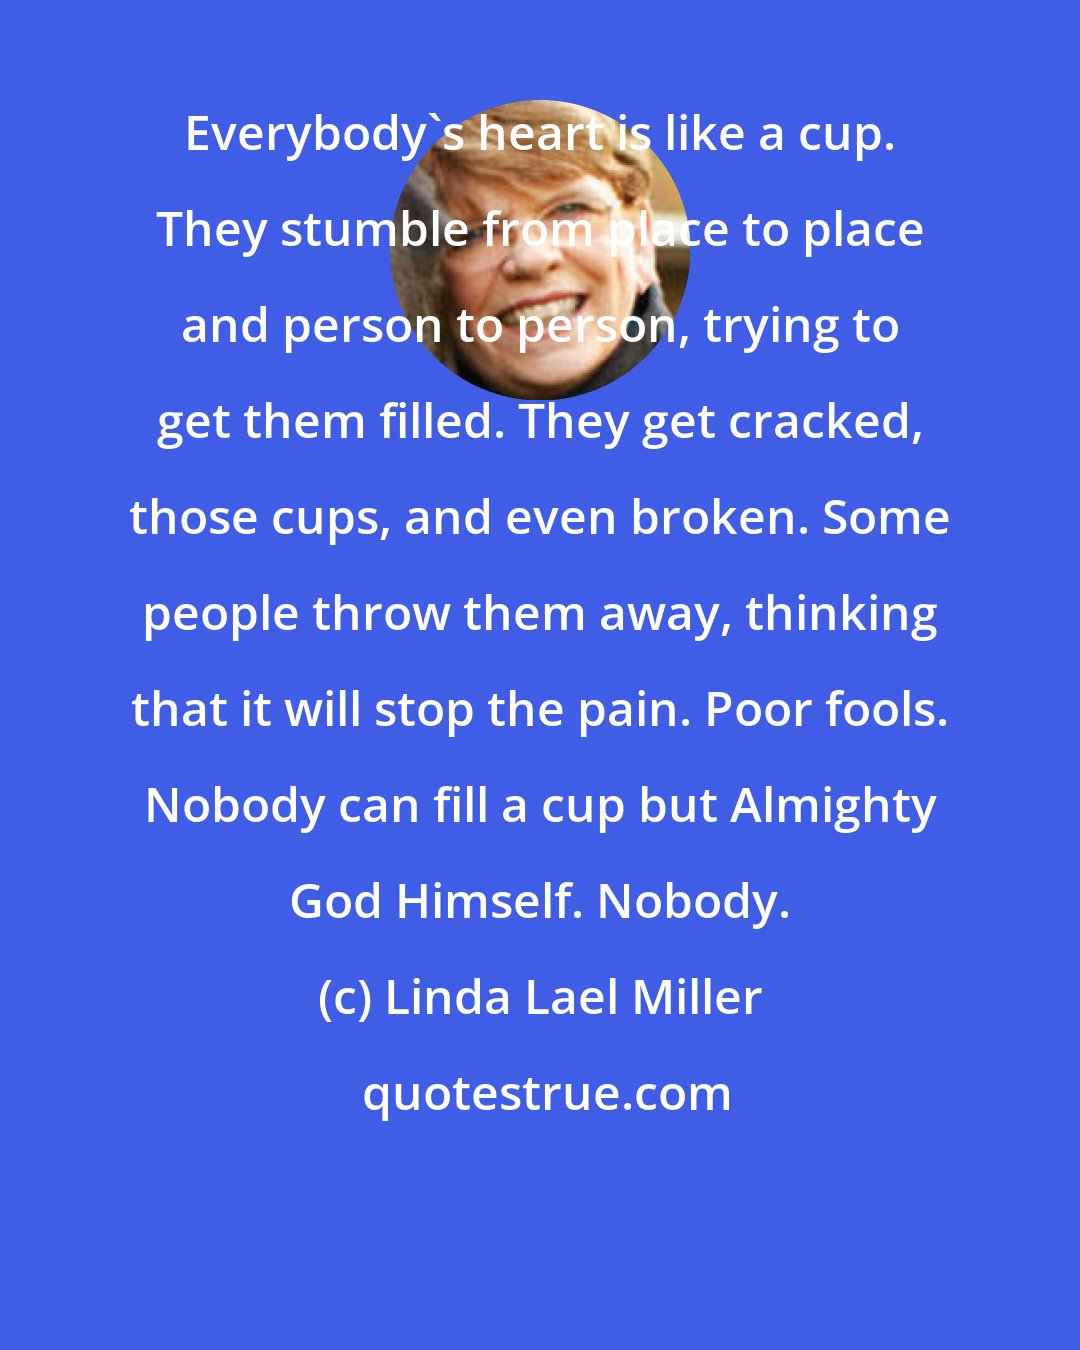 Linda Lael Miller: Everybody's heart is like a cup. They stumble from place to place and person to person, trying to get them filled. They get cracked, those cups, and even broken. Some people throw them away, thinking that it will stop the pain. Poor fools. Nobody can fill a cup but Almighty God Himself. Nobody.